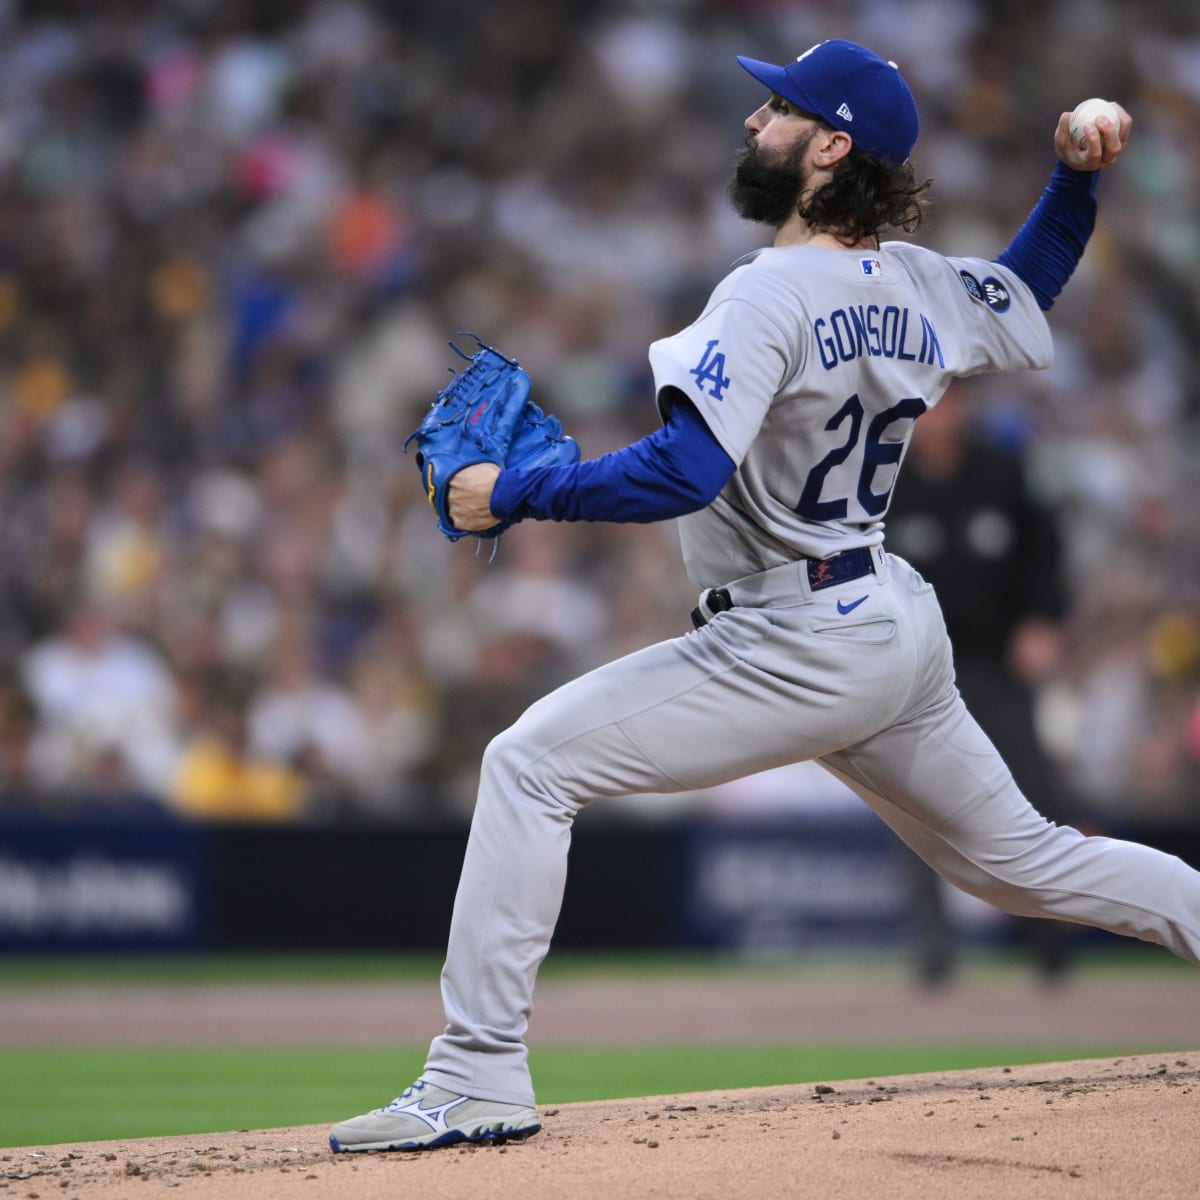 Dodgers RHP Tony Gonsolin named starter for Game 3 of NLDS - CBS